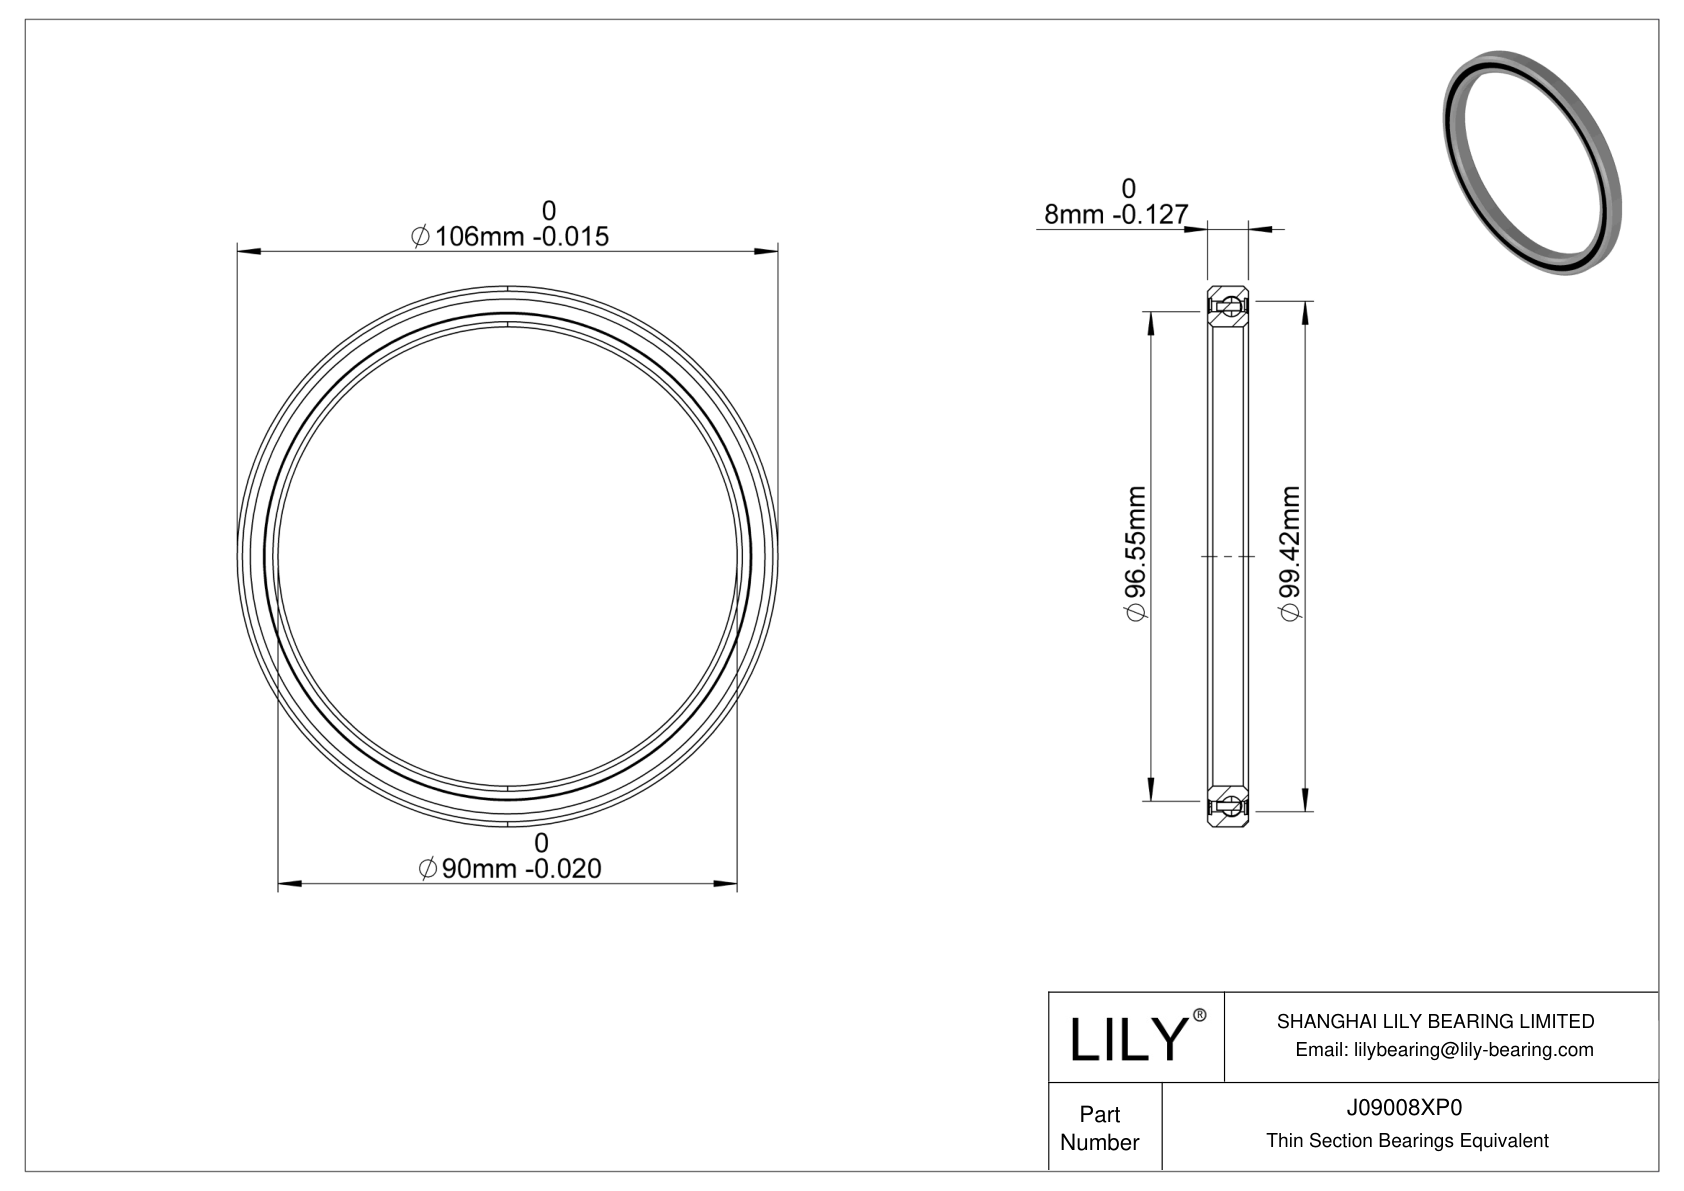 J09008XP0 Constant Section (CS) Bearings cad drawing